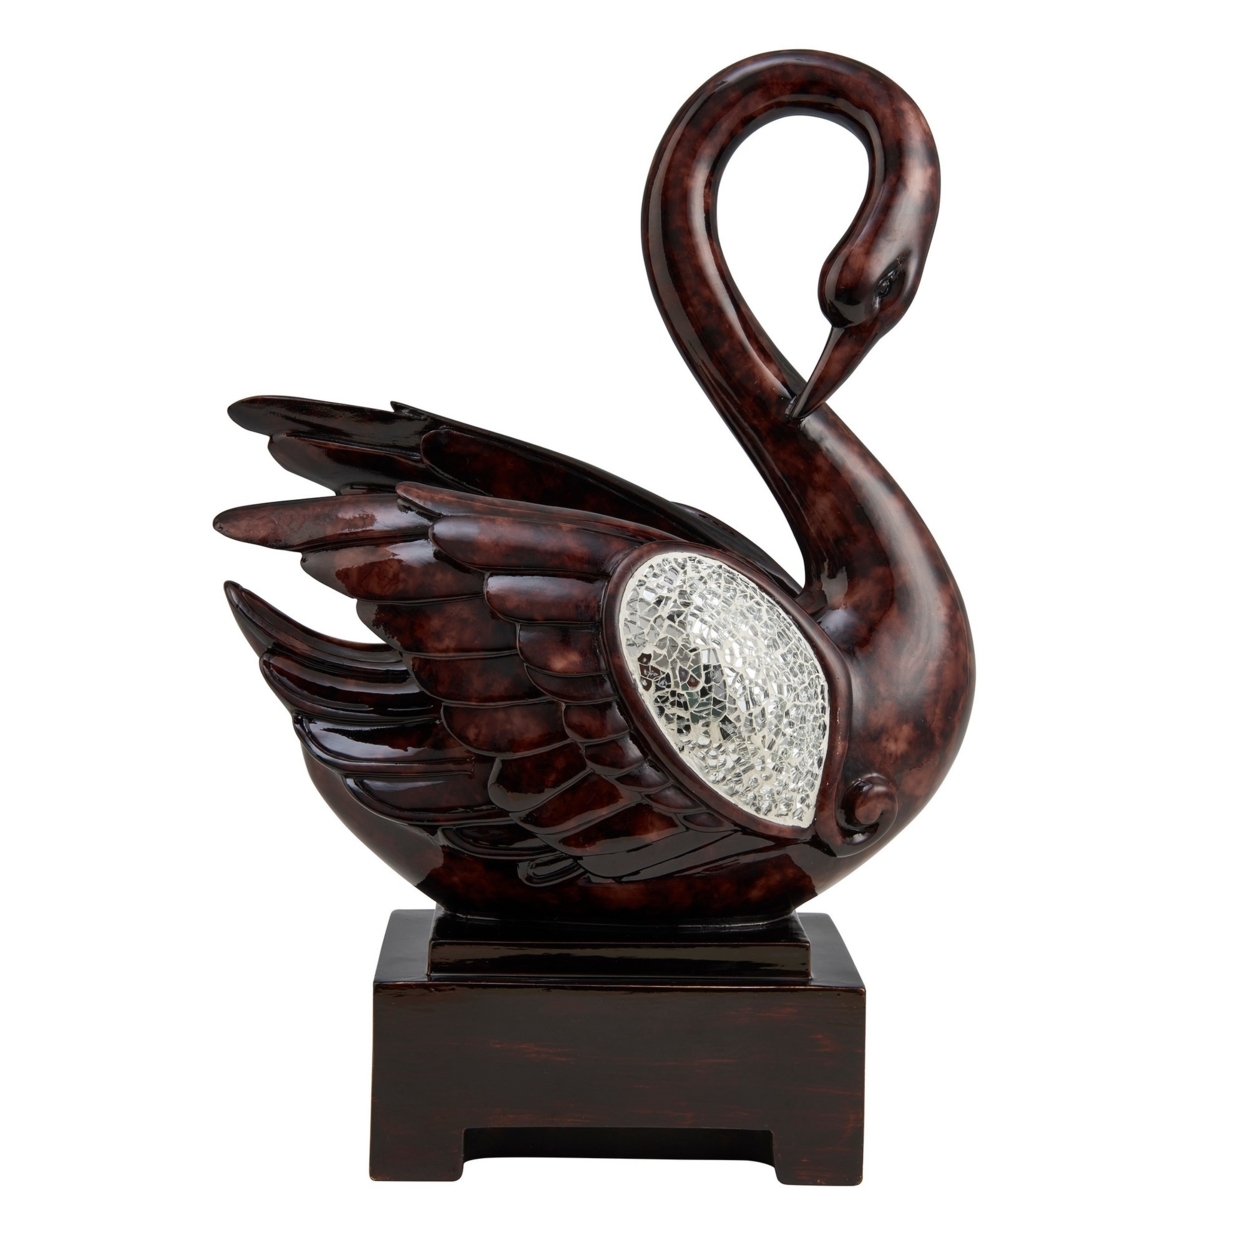 Accent Decor With Swan Design And Crackle Glass Accent, Brown- Saltoro Sherpi